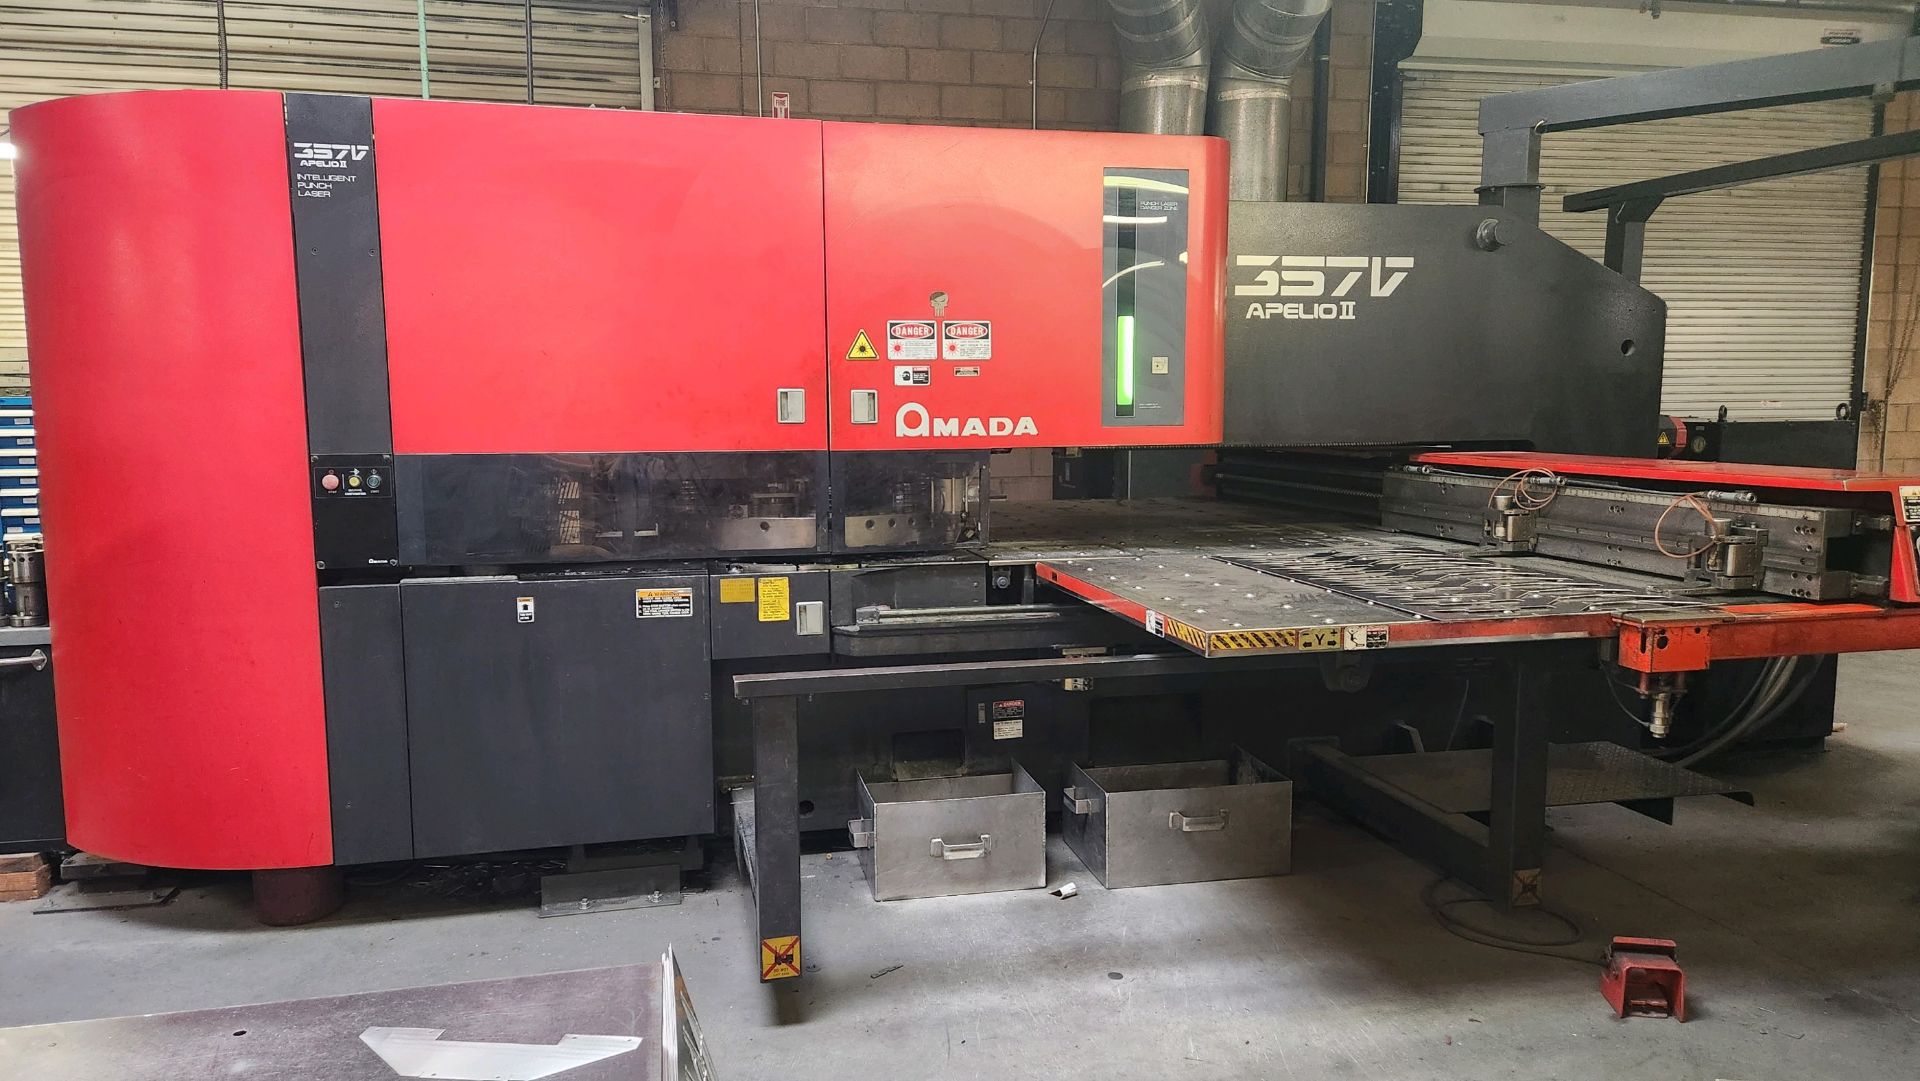 1994 Amada APPELIO II 357 CNC Laser /Turret Punch w/04P-C Controls, Loc: Palm Springs CA, SOLD AS IS - Image 5 of 16